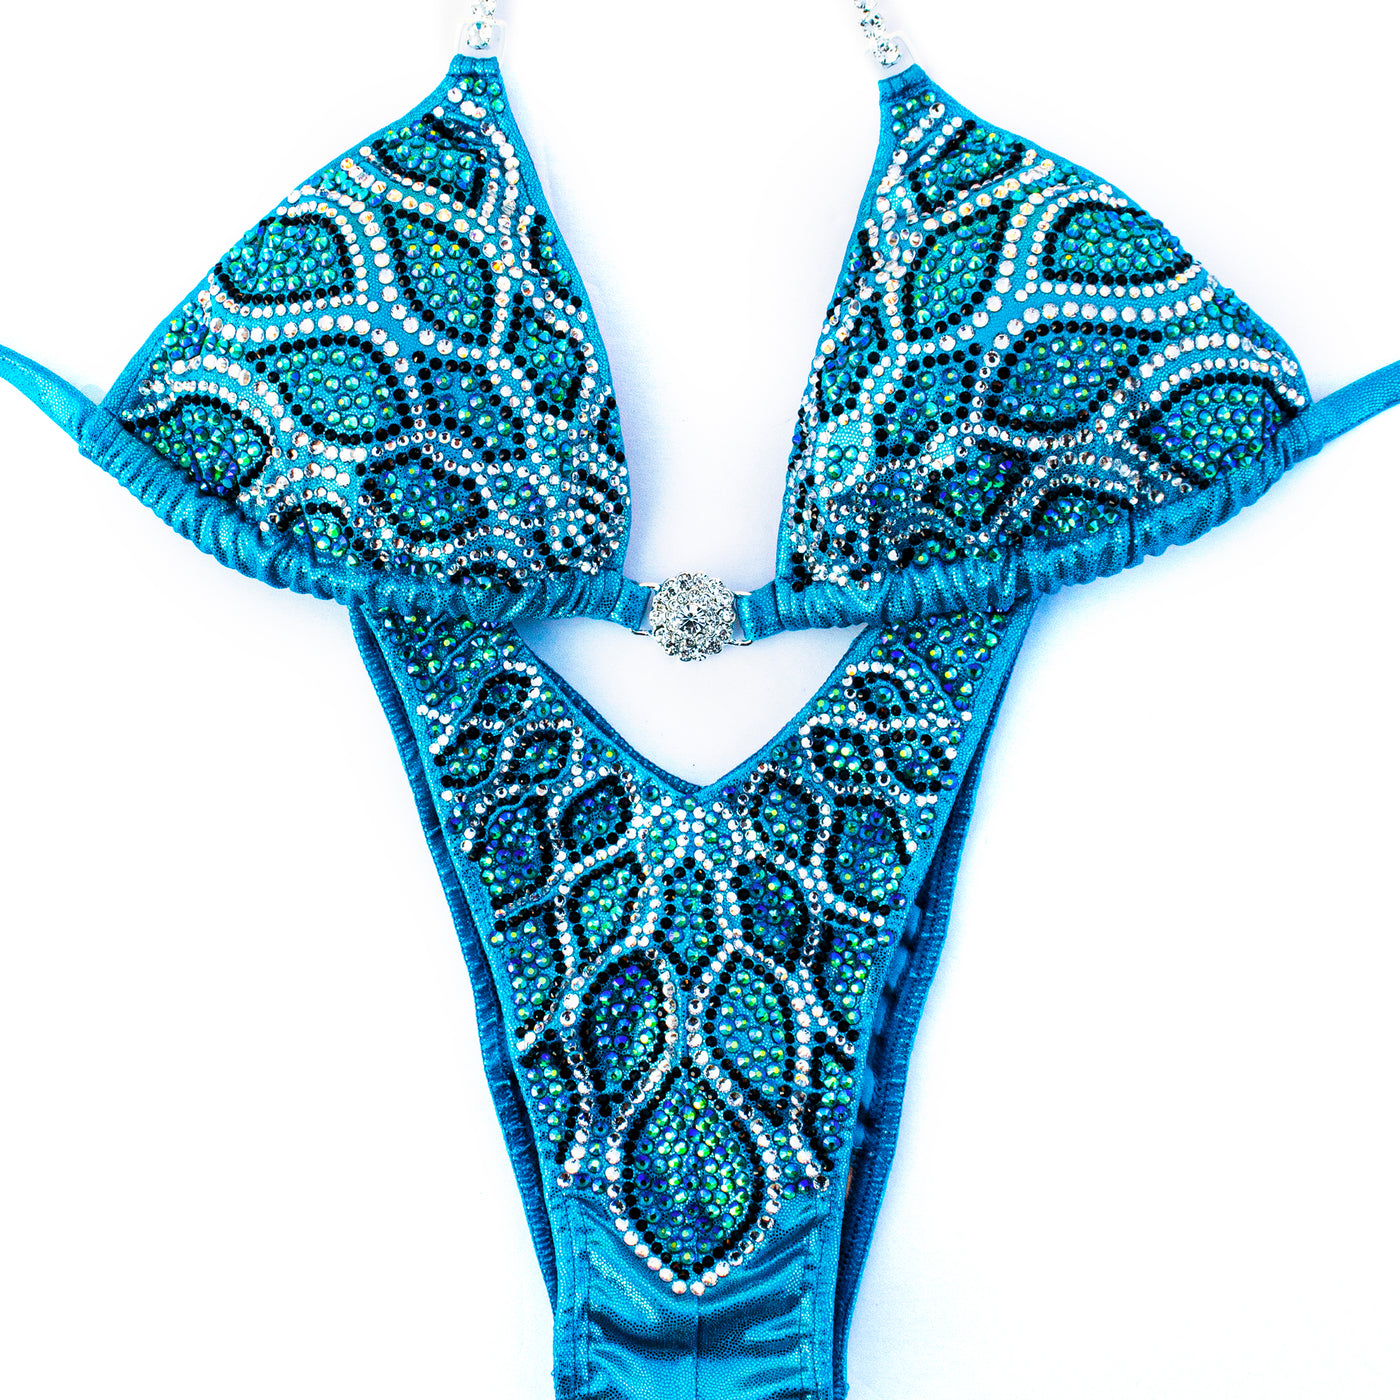 Ivy Figure/WPD Competition Suit S/S | OMG Bikinis Rentals